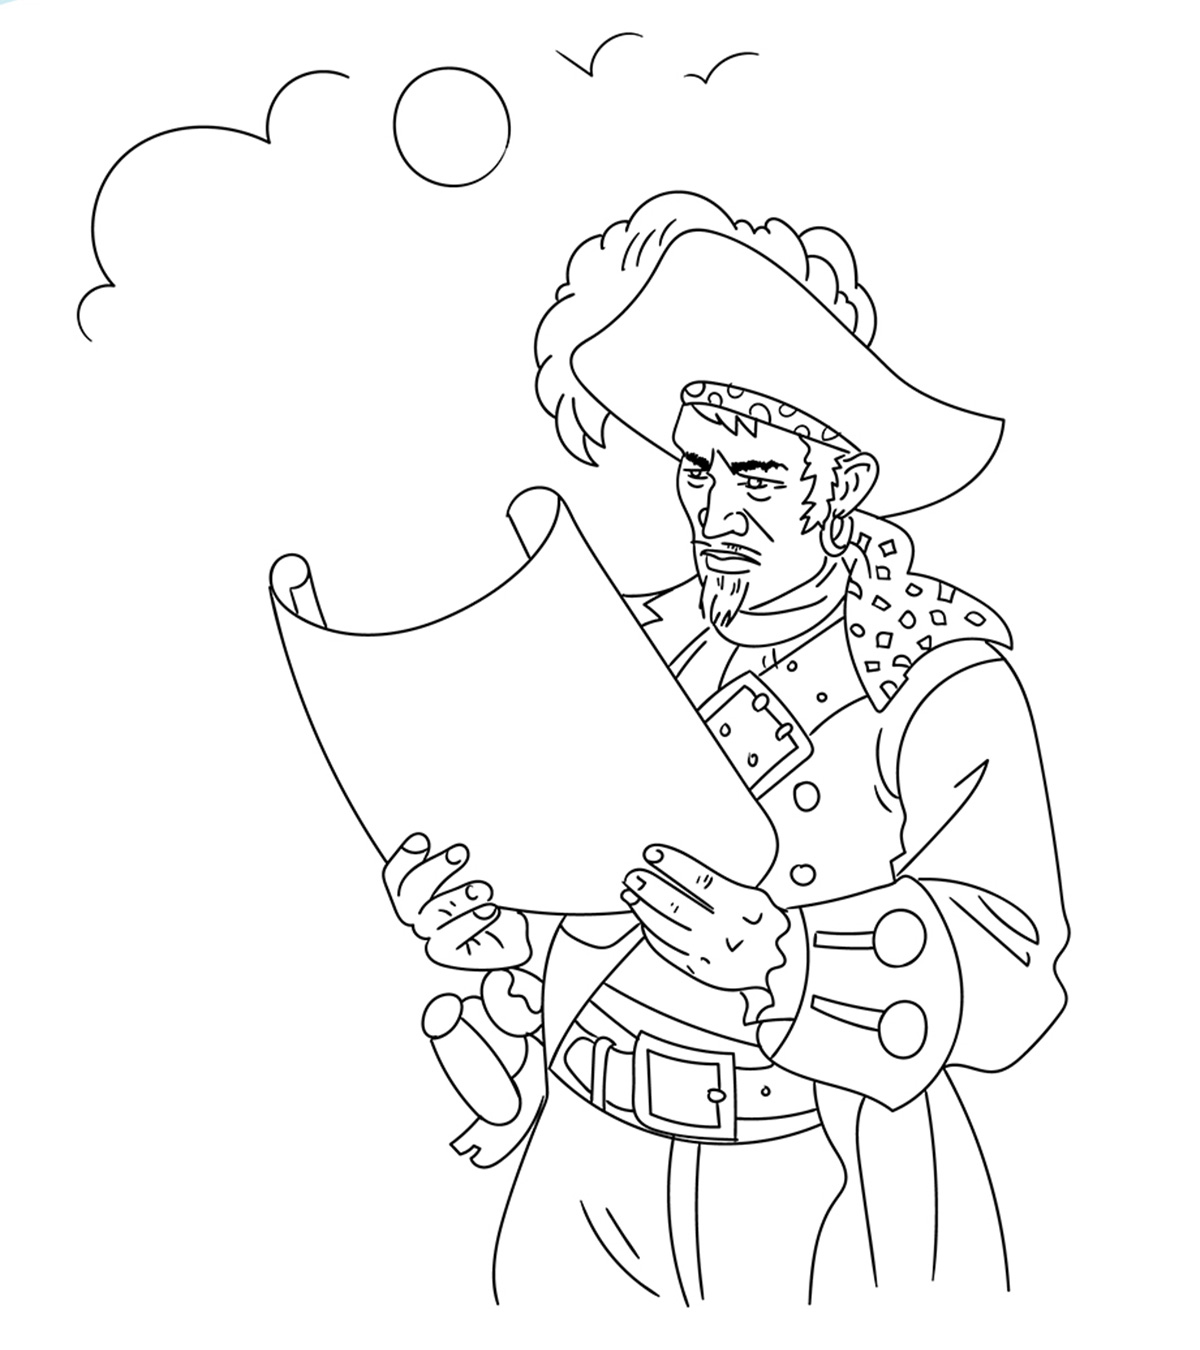 Top 10 Pirates Of The Caribbean Coloring Pages For Your Little Ones_image